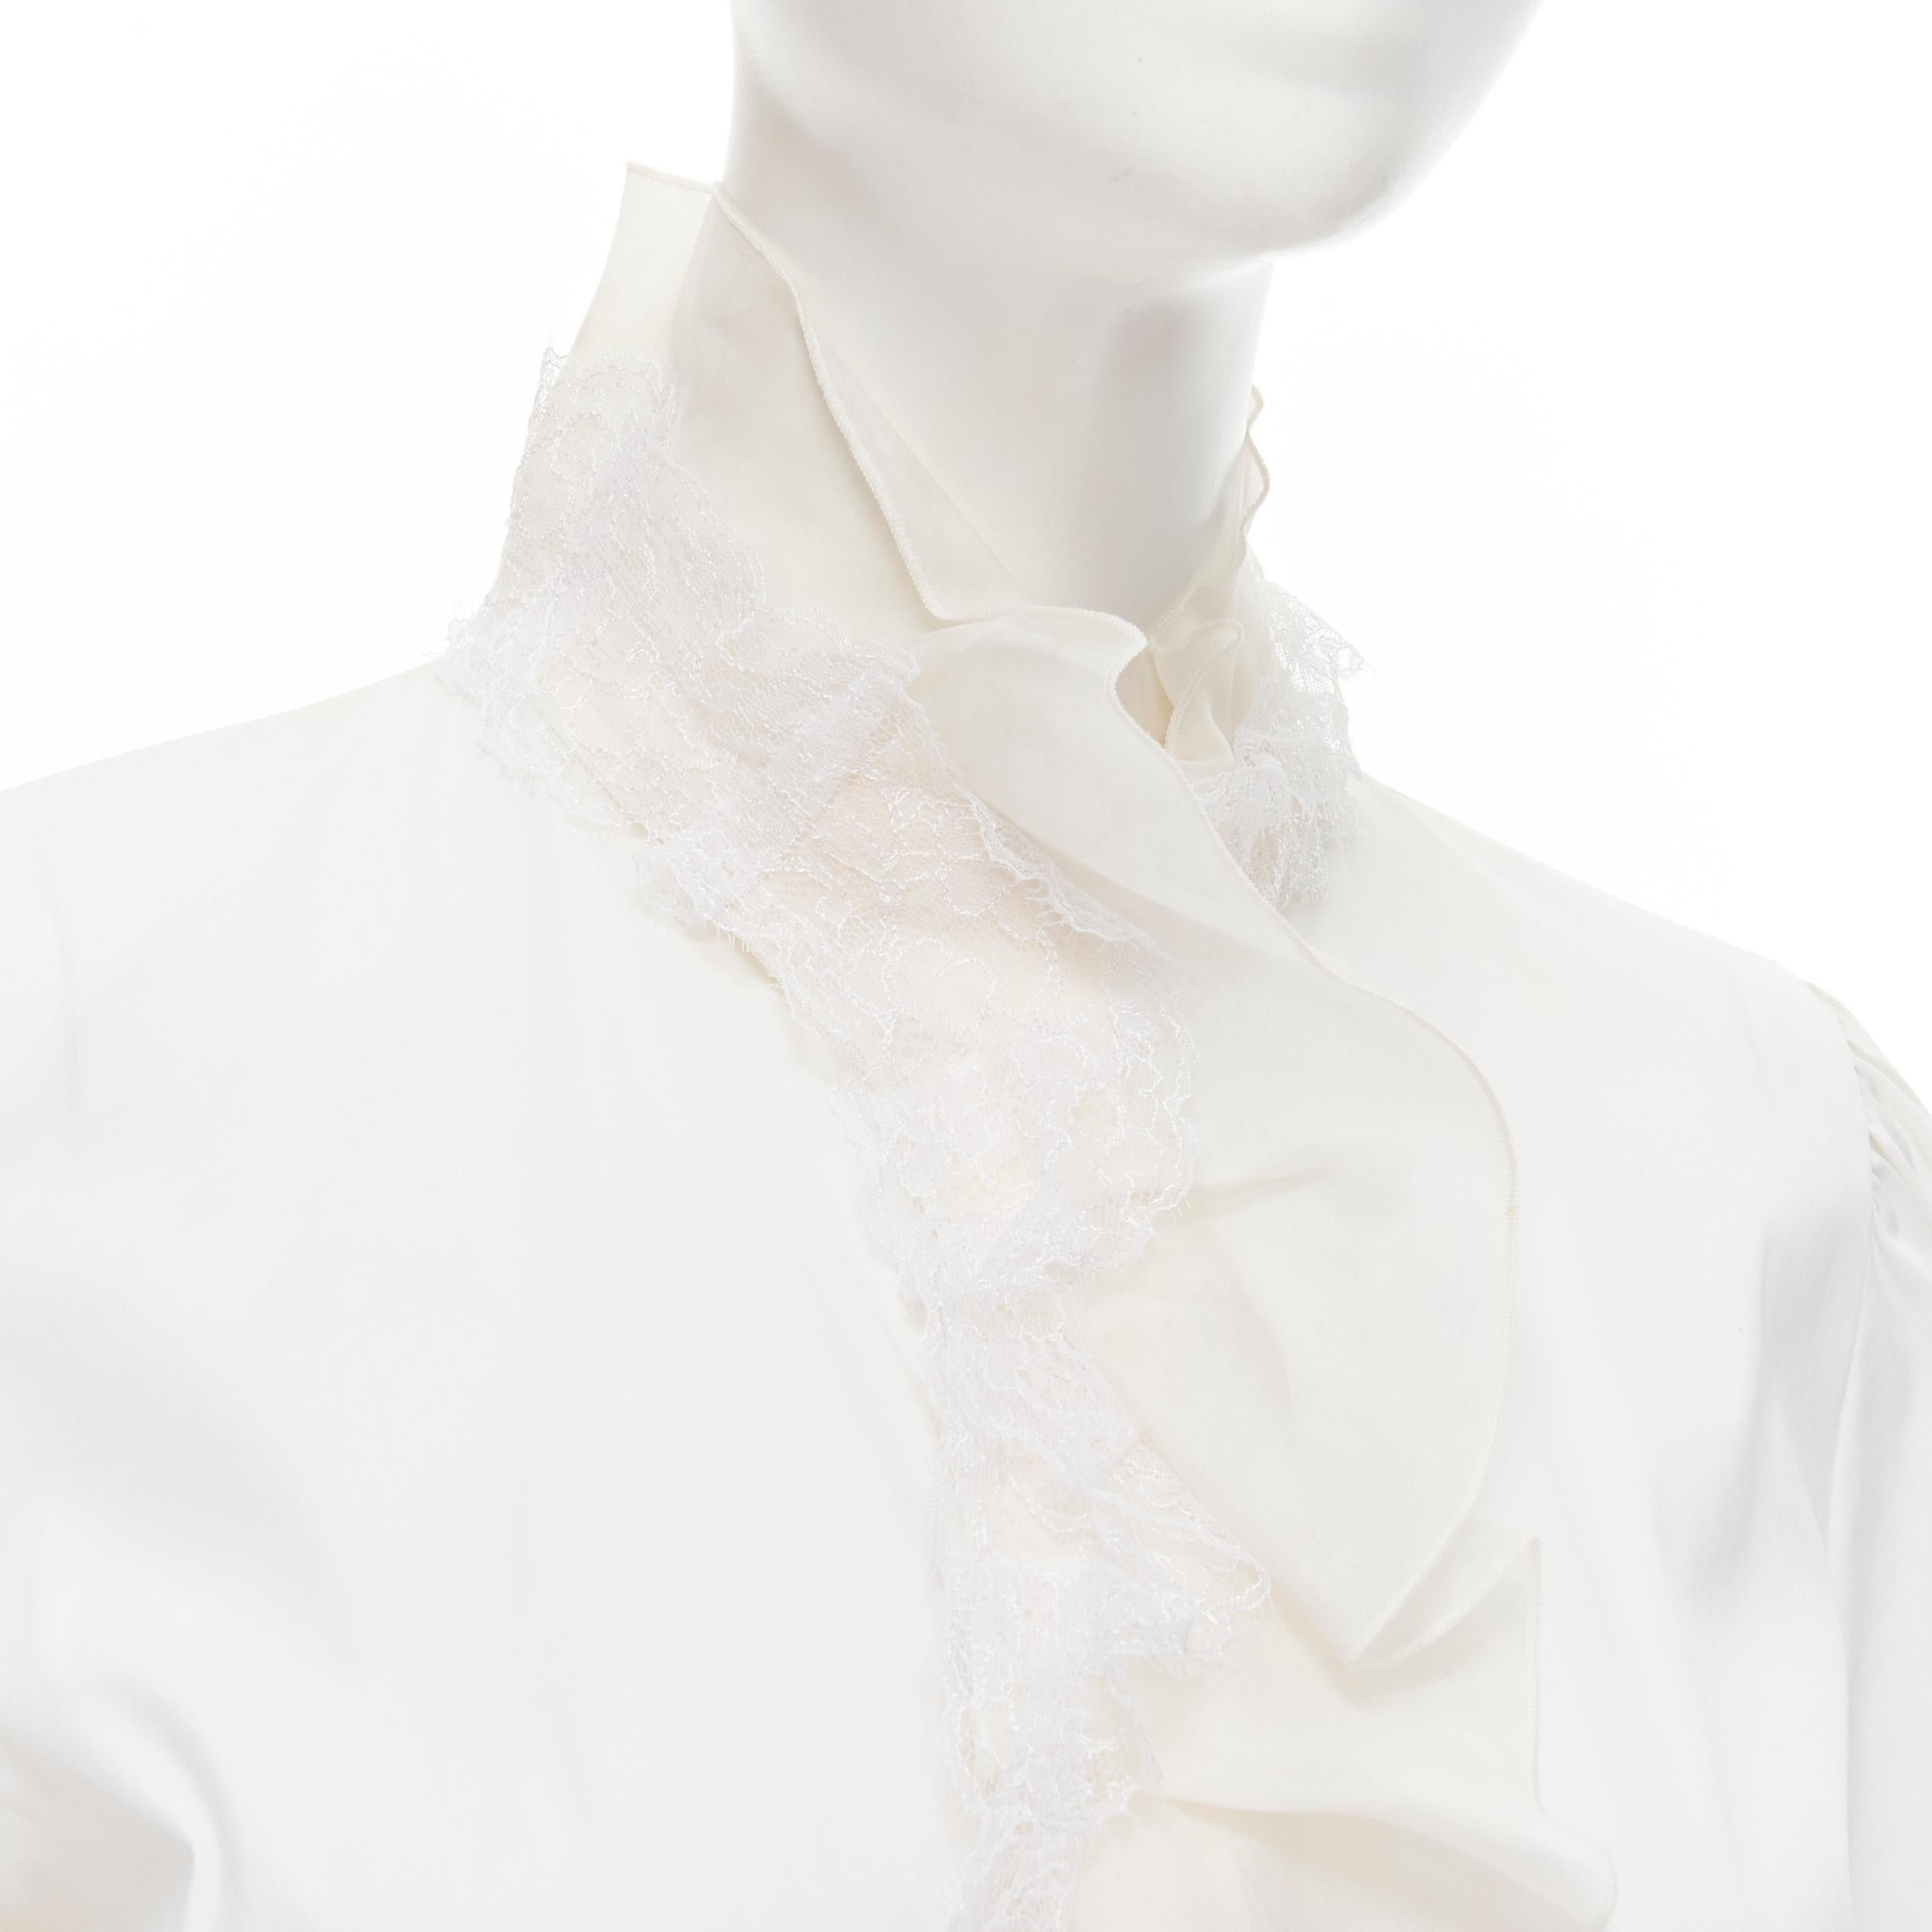 DOLCE GABBANA white cotton lace ruffle collar puff sleeve shirt IT44 M 
Reference: GIYG/A00206 
Brand: Dolce Gabbana 
Material: Cotton 
Color: White 
Pattern: Solid 
Closure: Button
Extra Detail: Lace trim silk ruffle collar. Long sleeve shirt. Fit